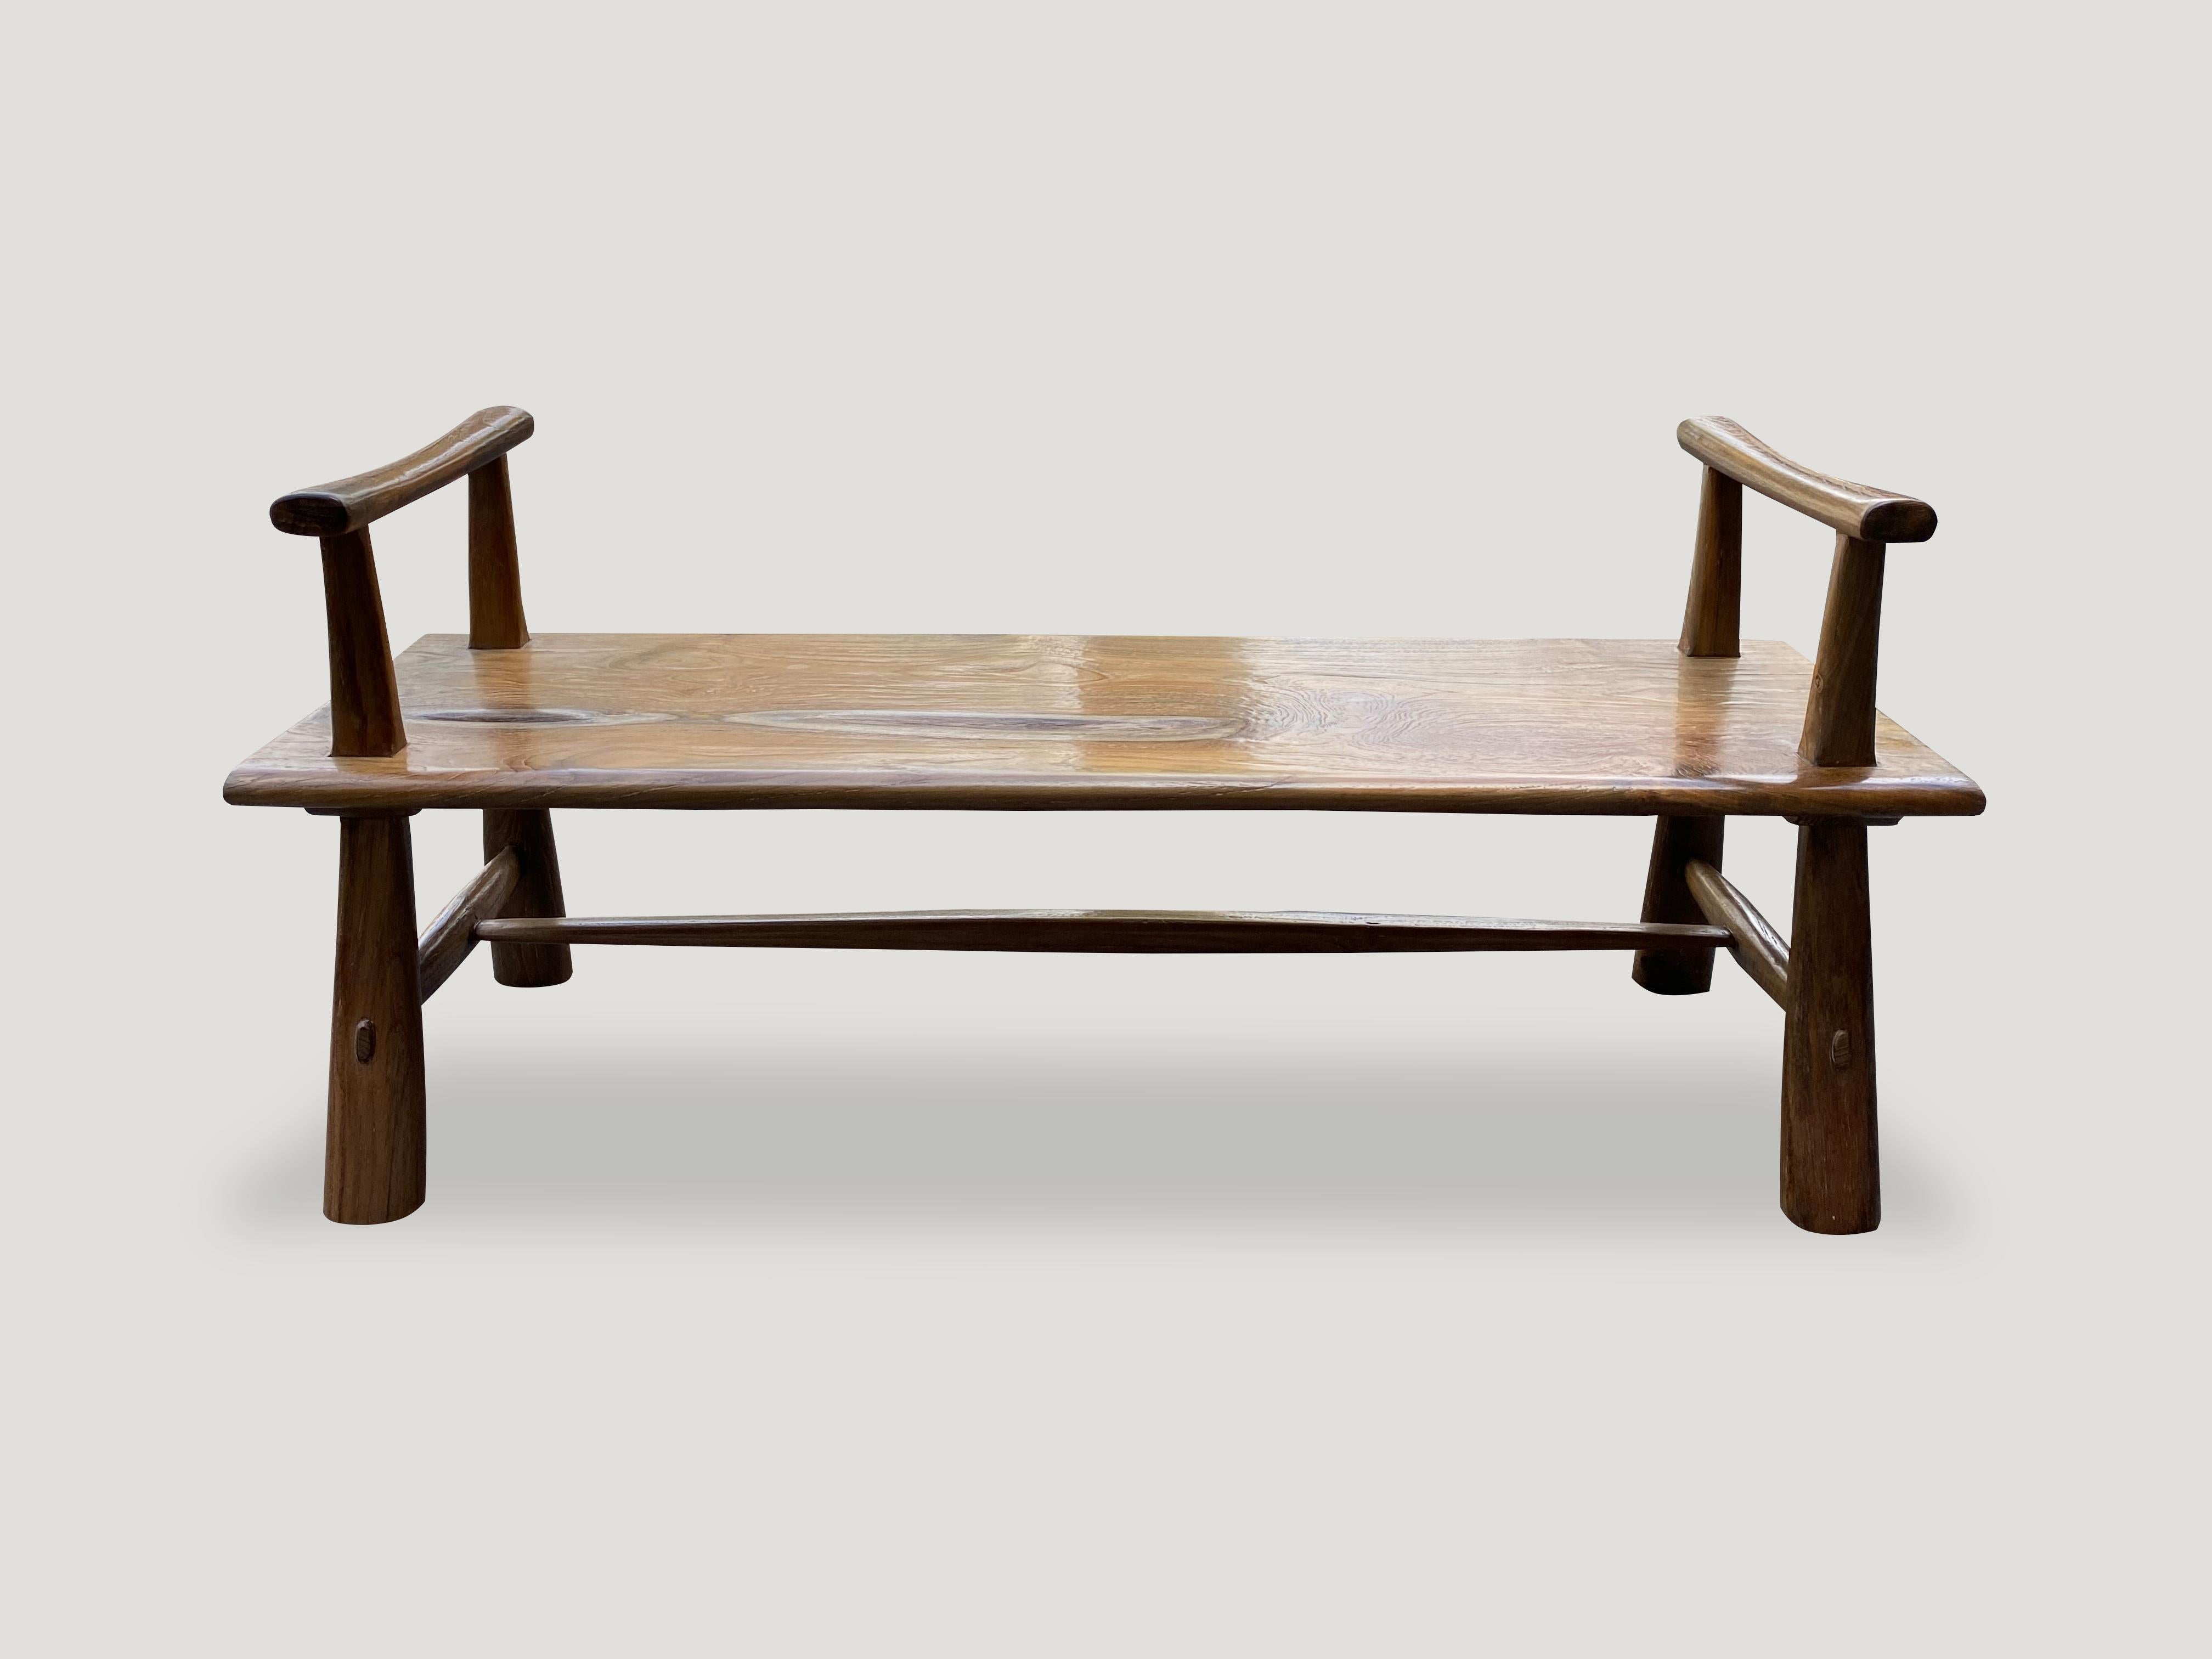 Andrianna Shamaris Teak Wood Single Slab Bench with Arms In Excellent Condition For Sale In New York, NY